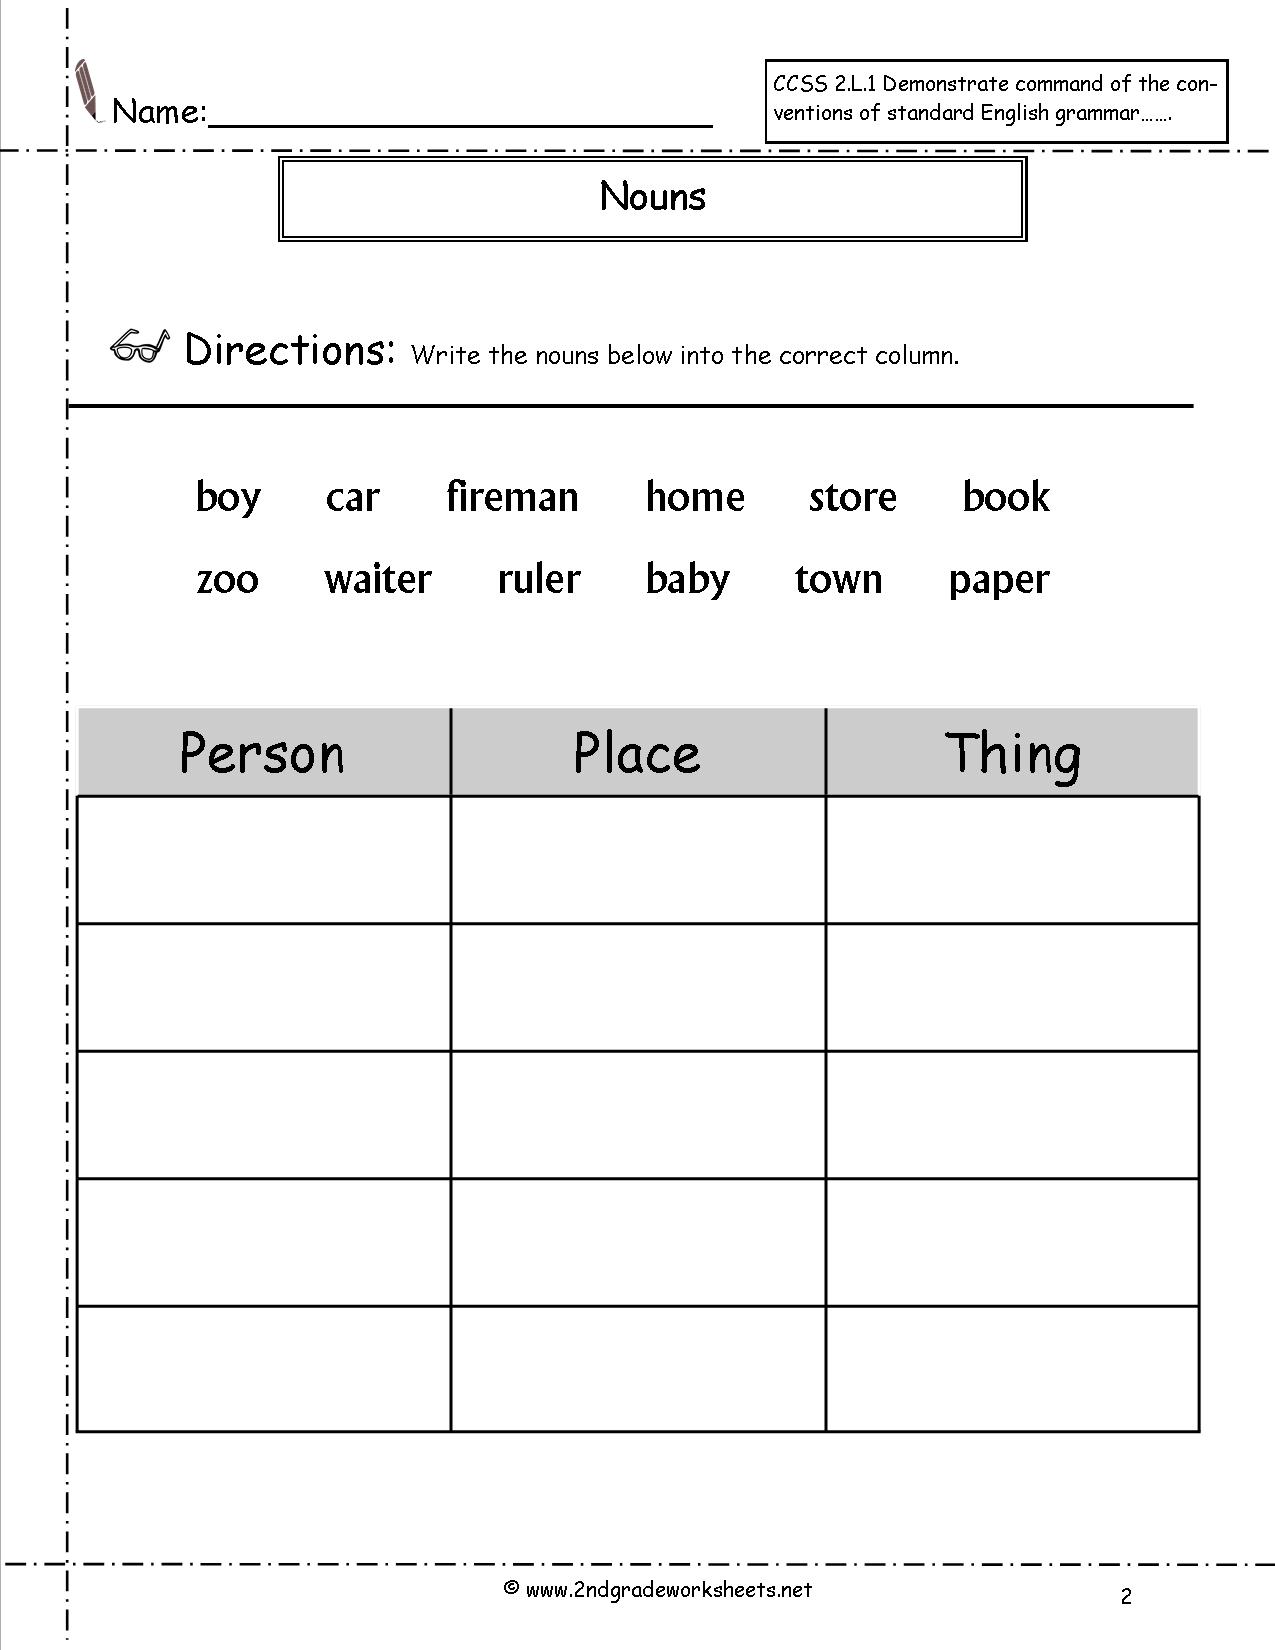 Nouns Worksheets 2nd Grade The Best Worksheets Image Collection